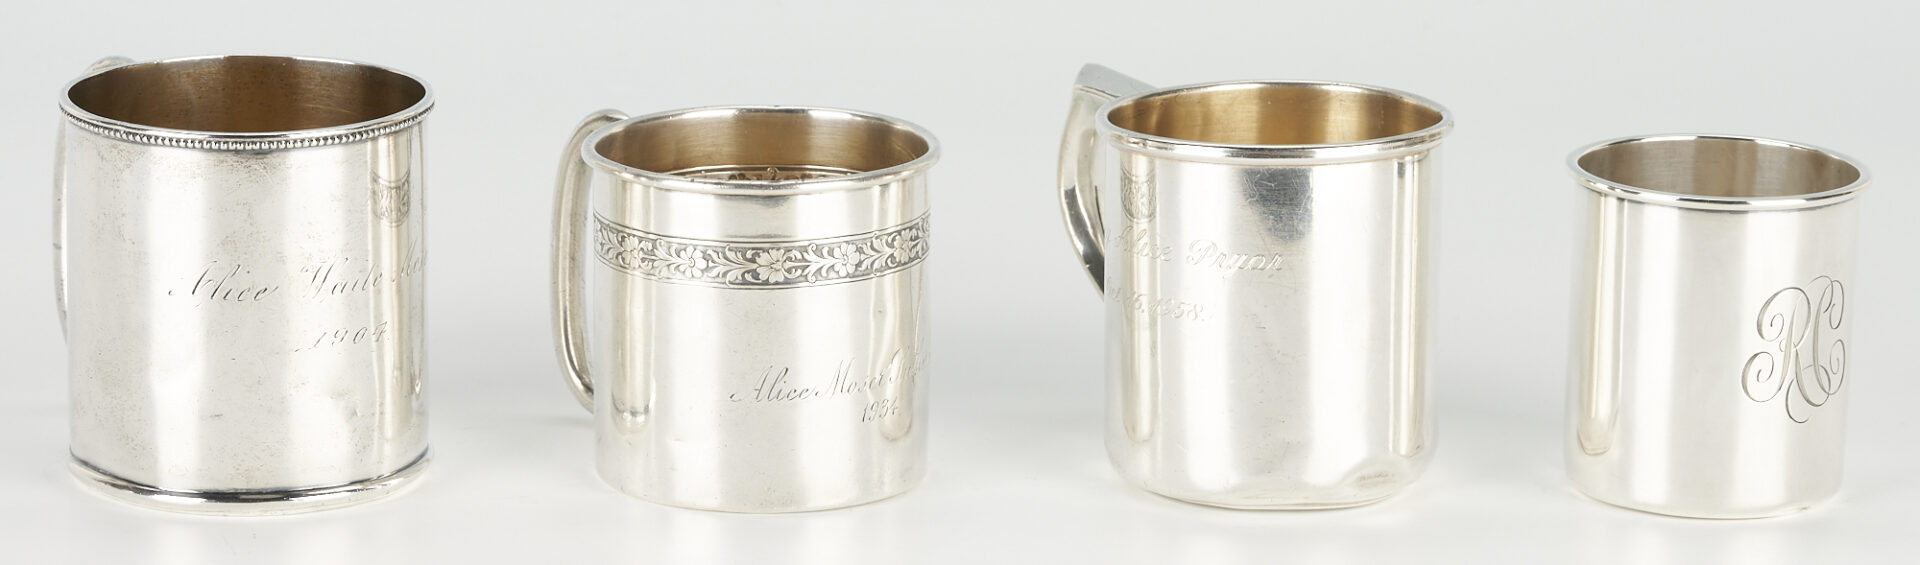 Lot 178: 12 Assorted Sterling Silver Hollowware Items, incl. Child's Cups